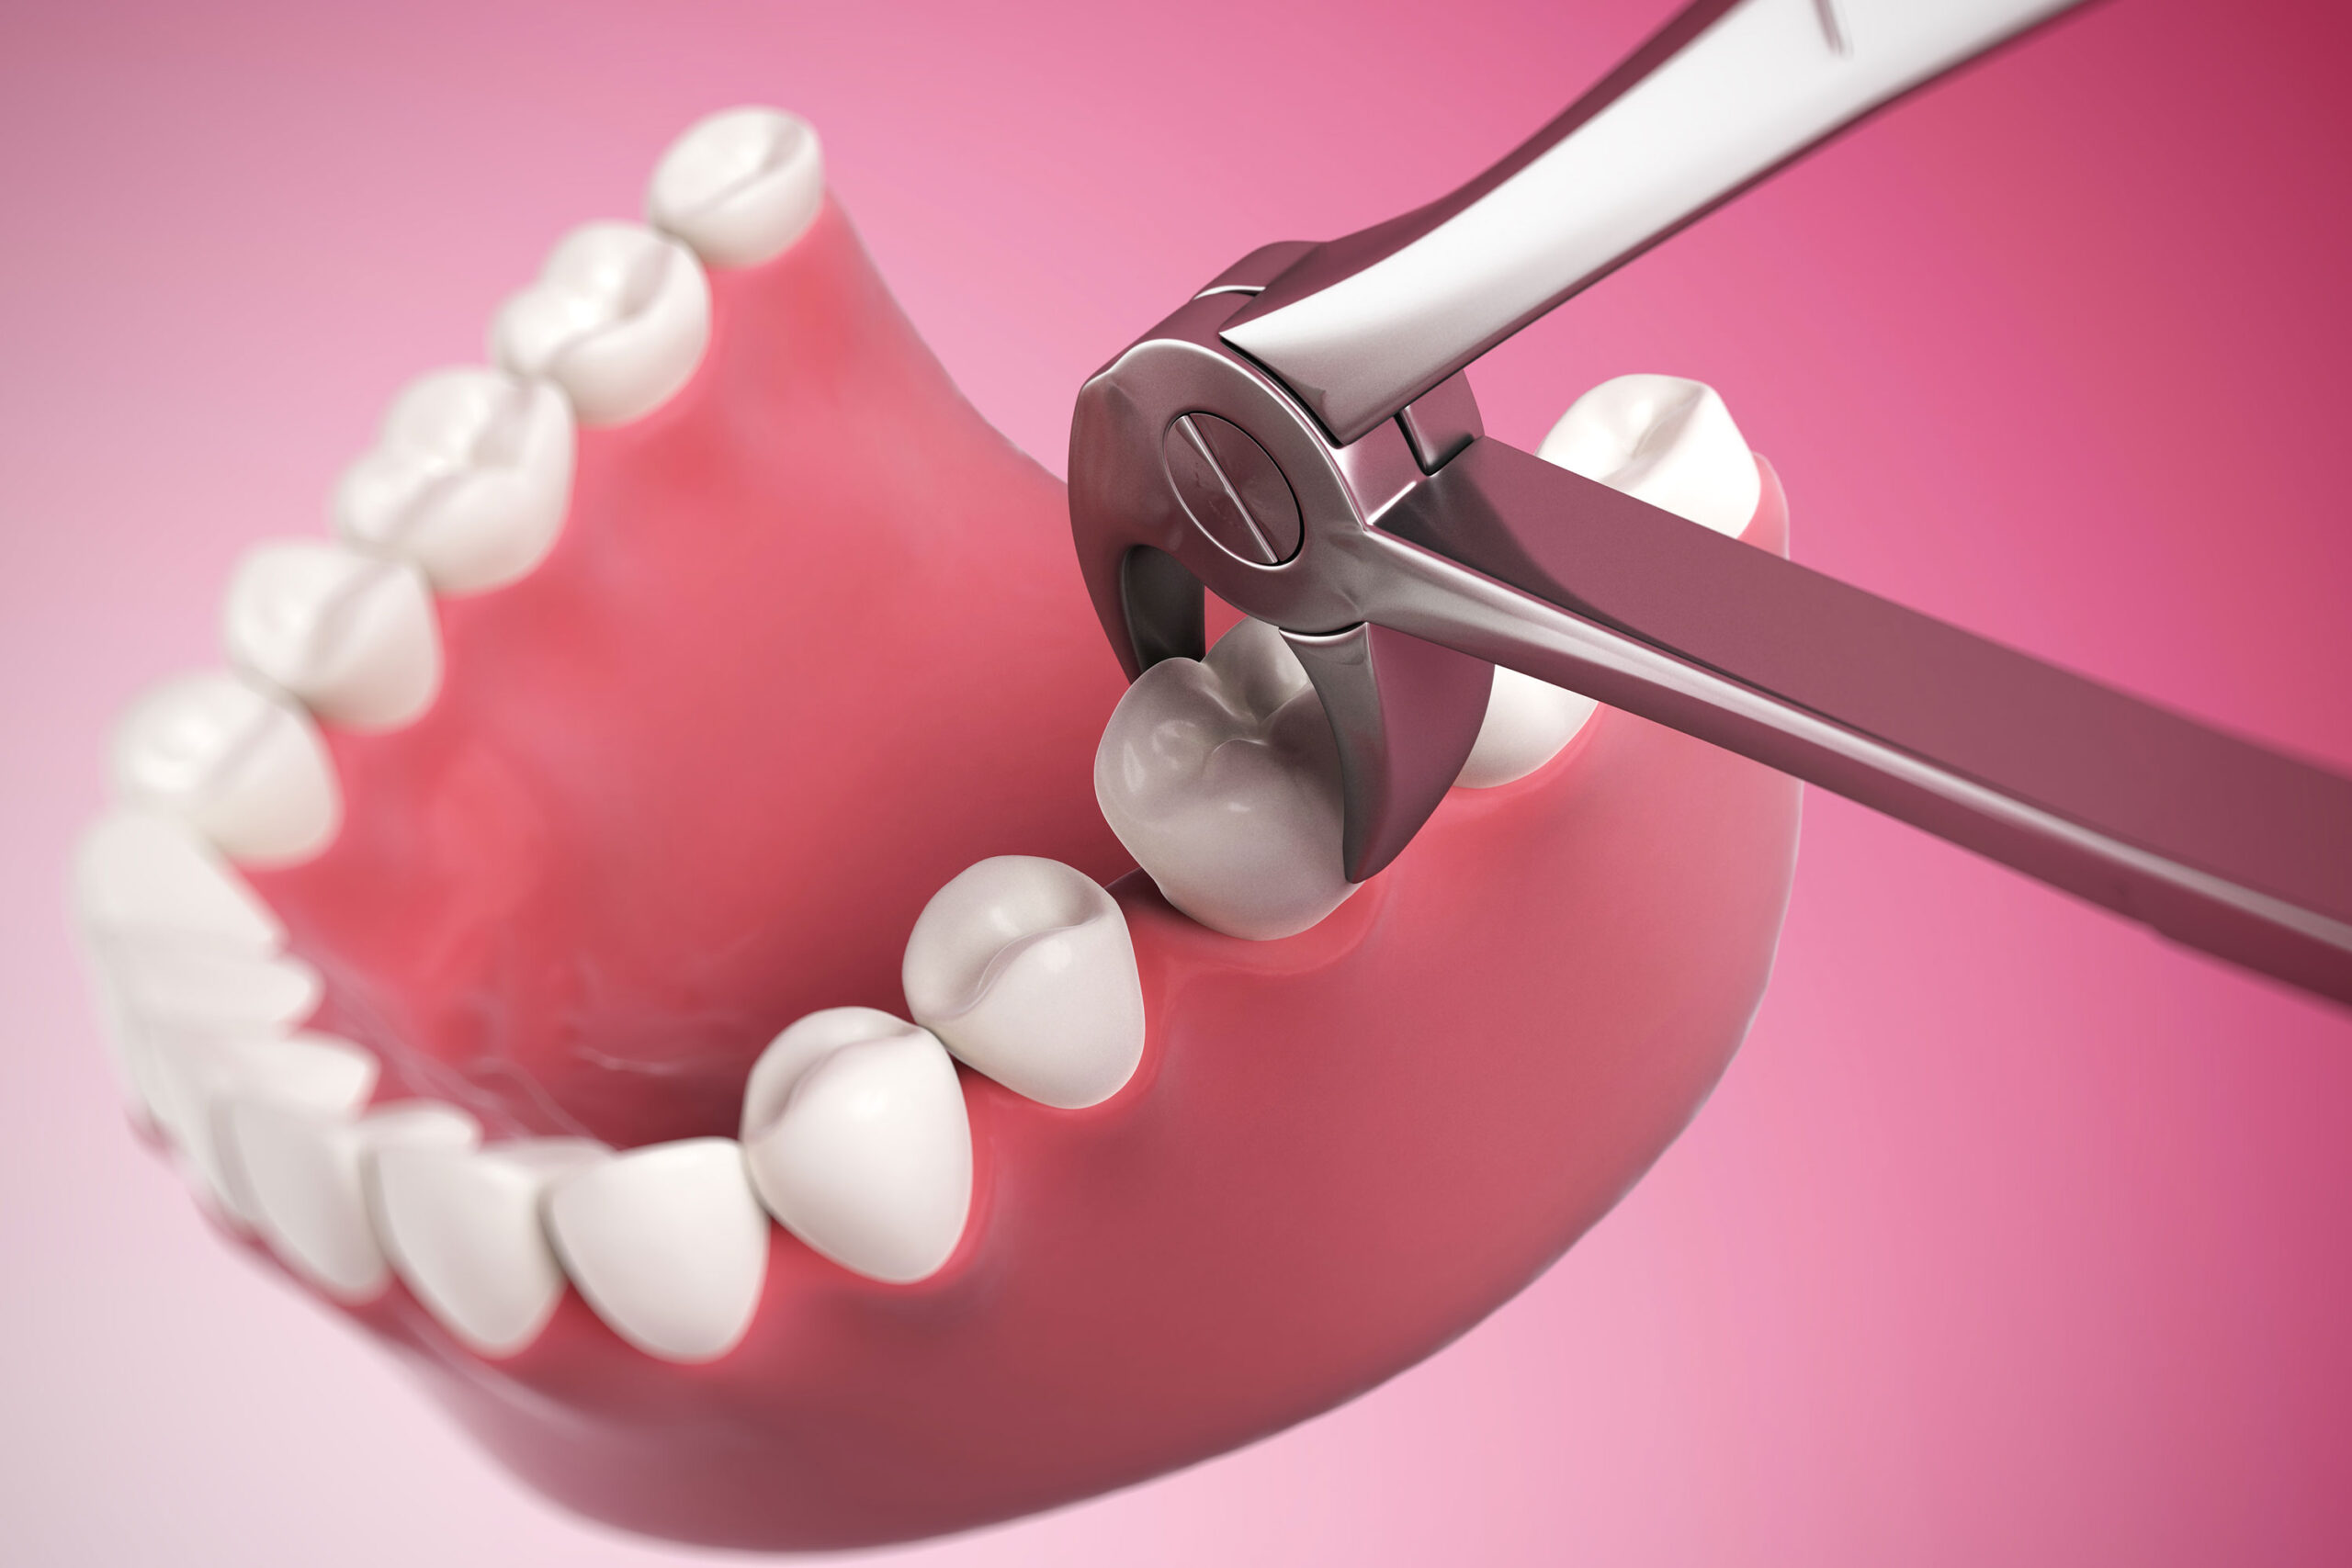 gums heal after a tooth extraction